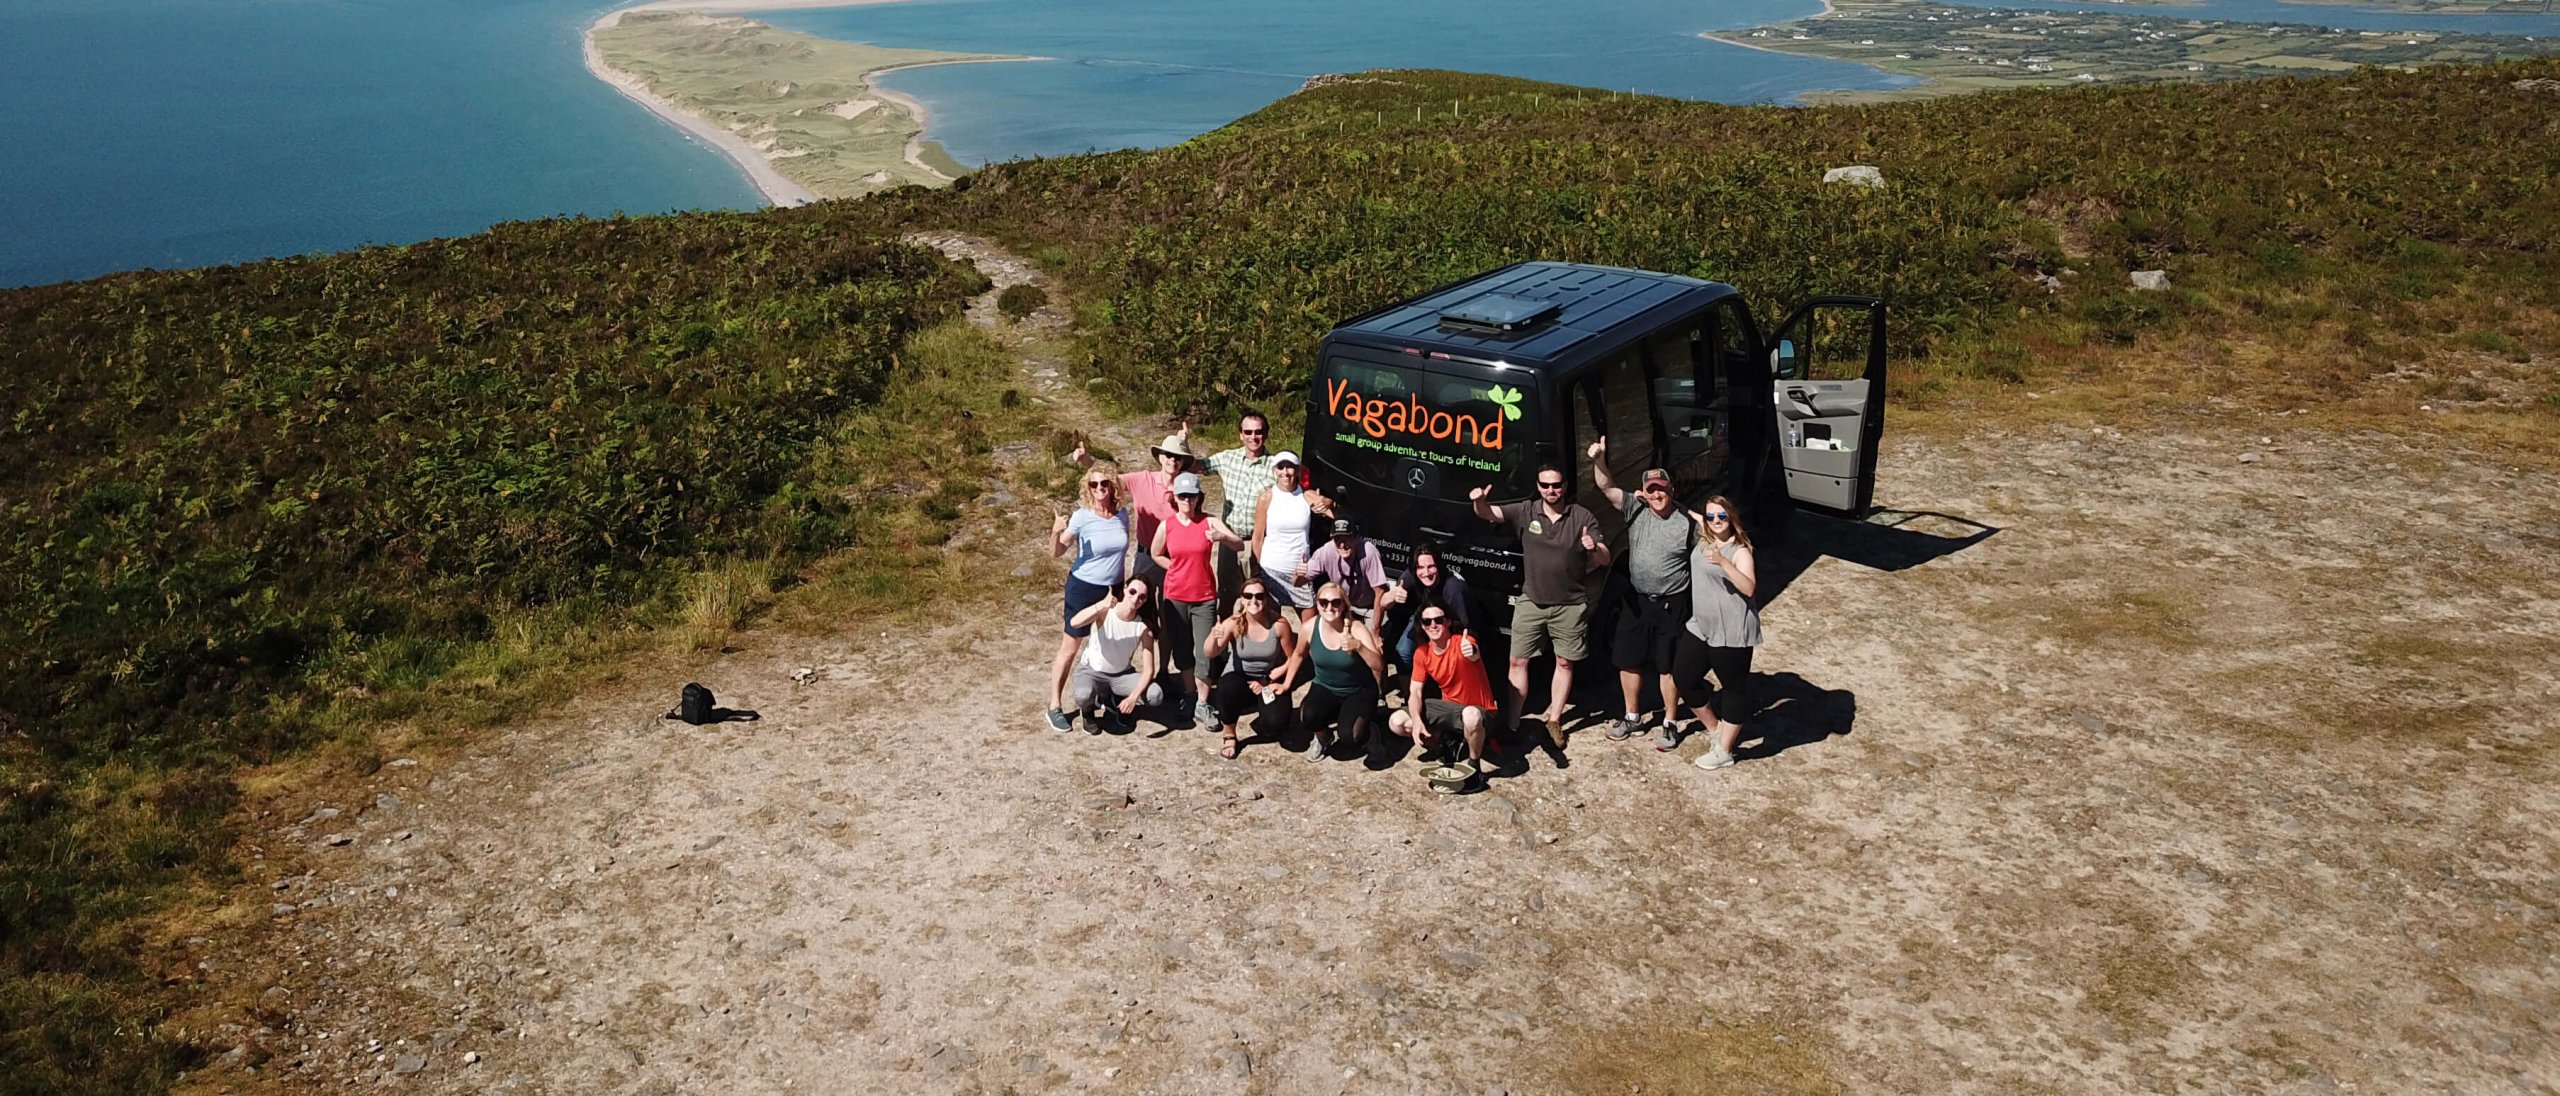 Vagabond Tour vehicle with group in scenic location in Ireland waving at camera from drone